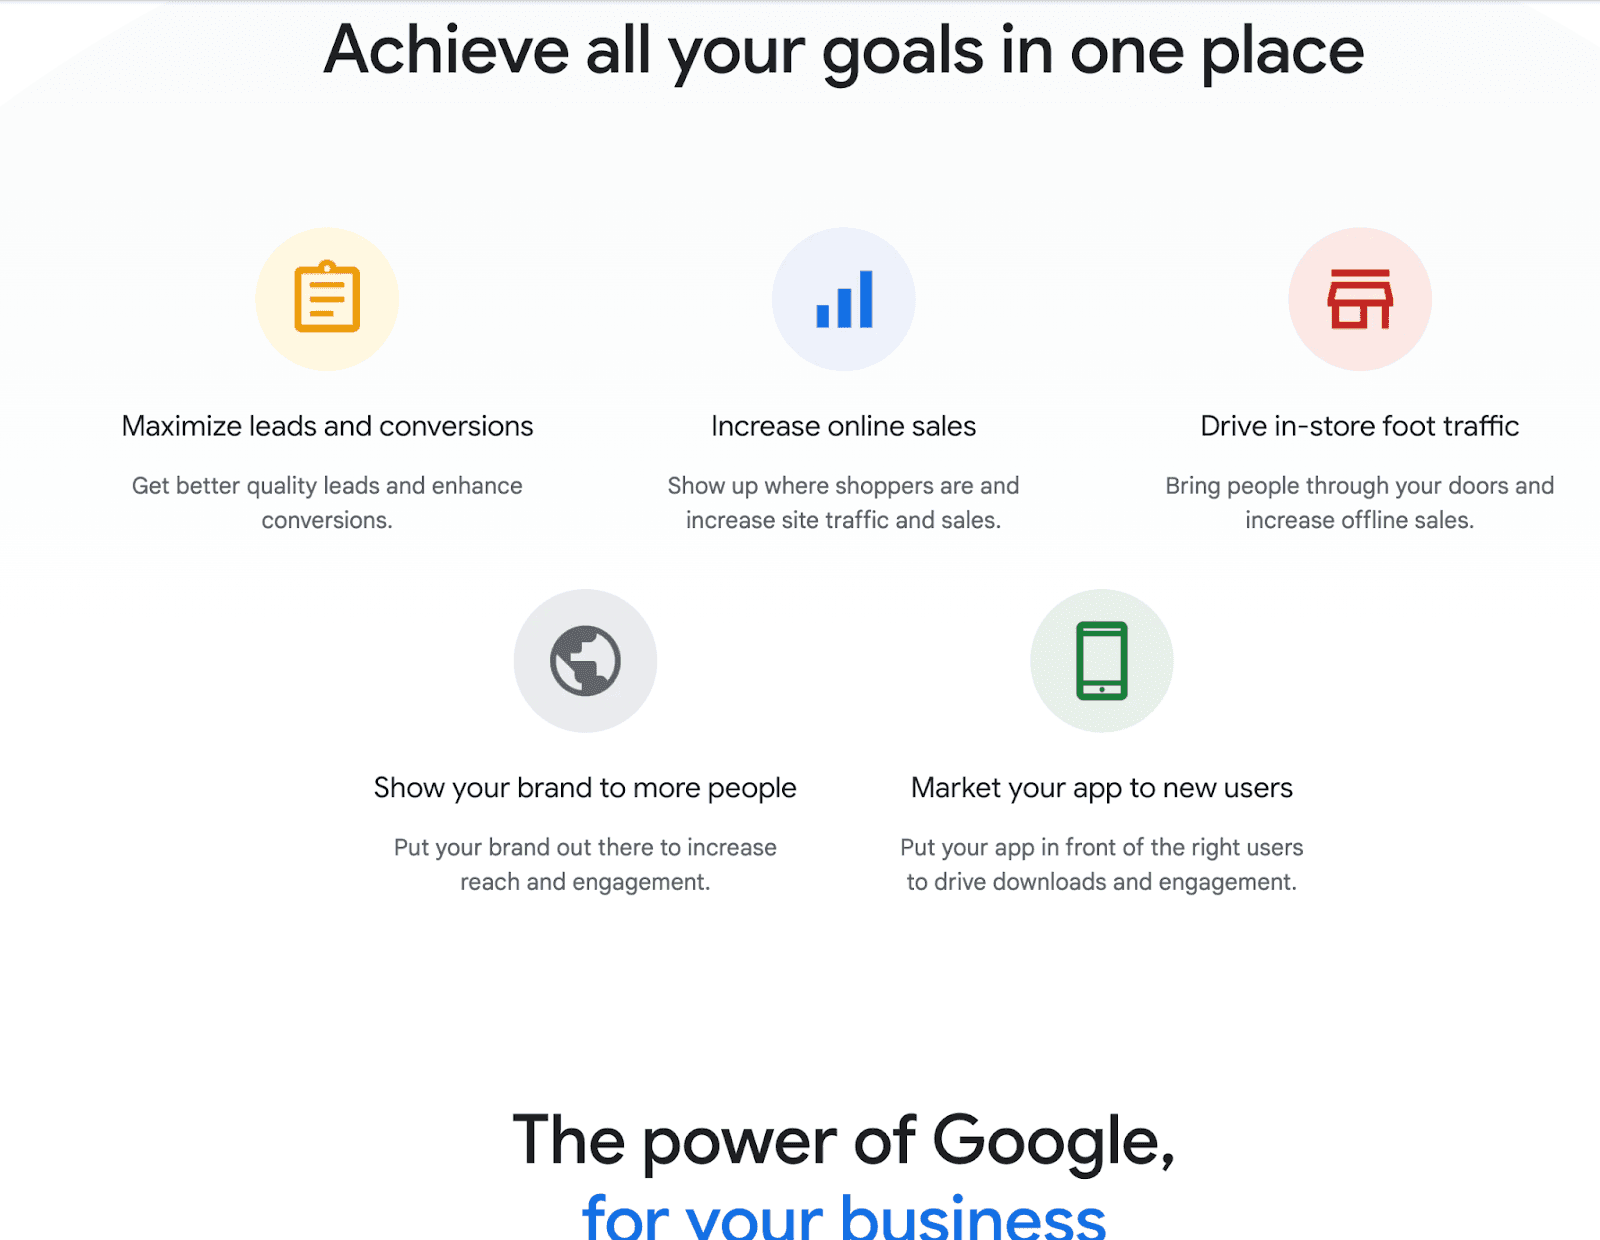 Achieve all your goals in one place - The power of Google, for your business